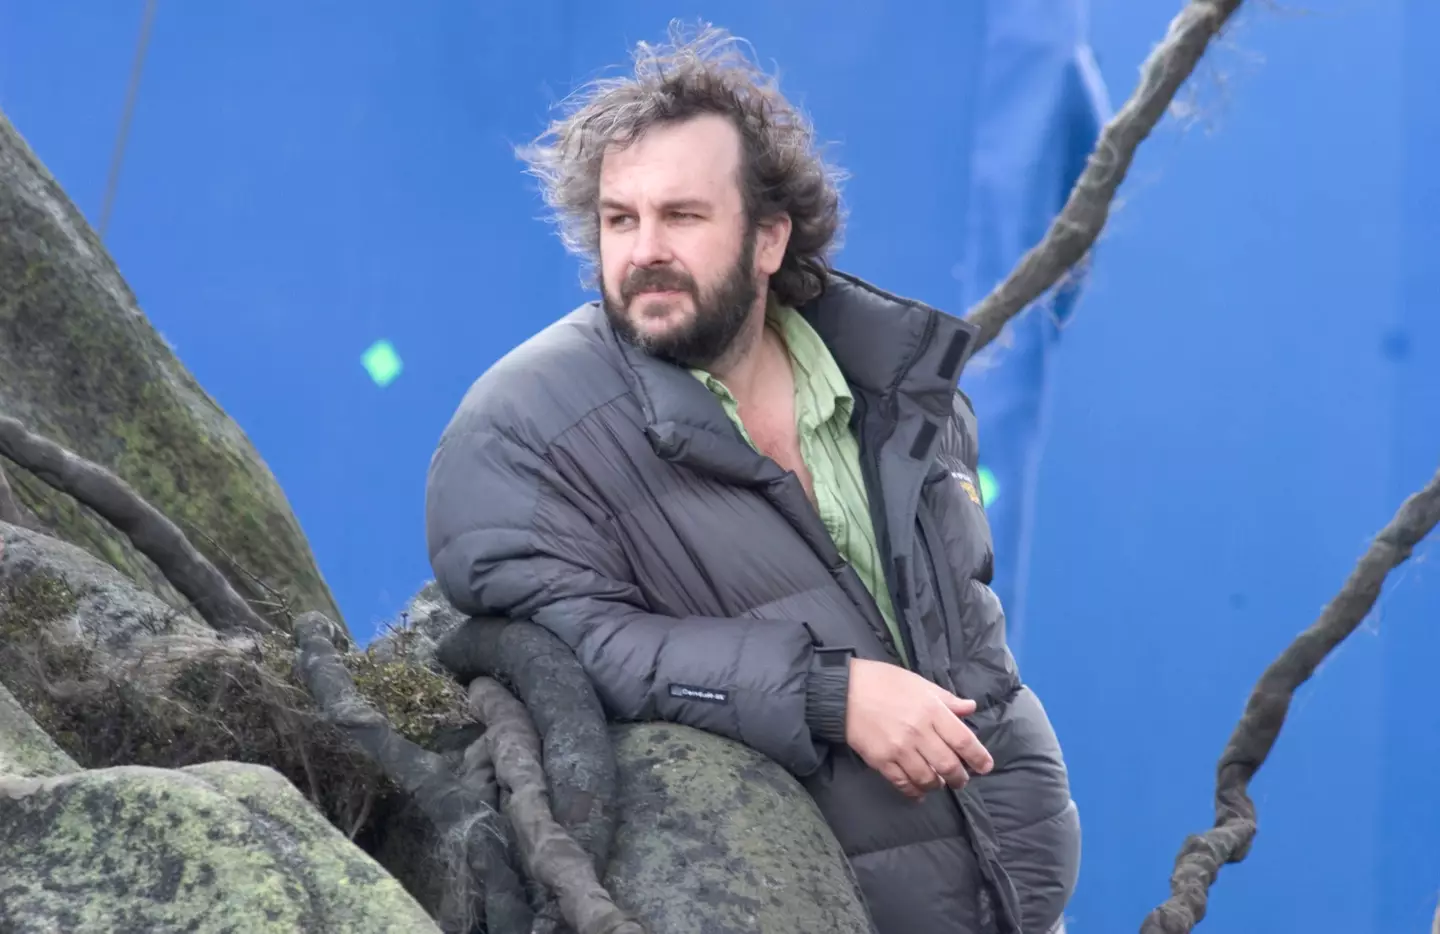 New Zealand director Peter Jackson is best known for his work on The Lord of the Rings trilogy.